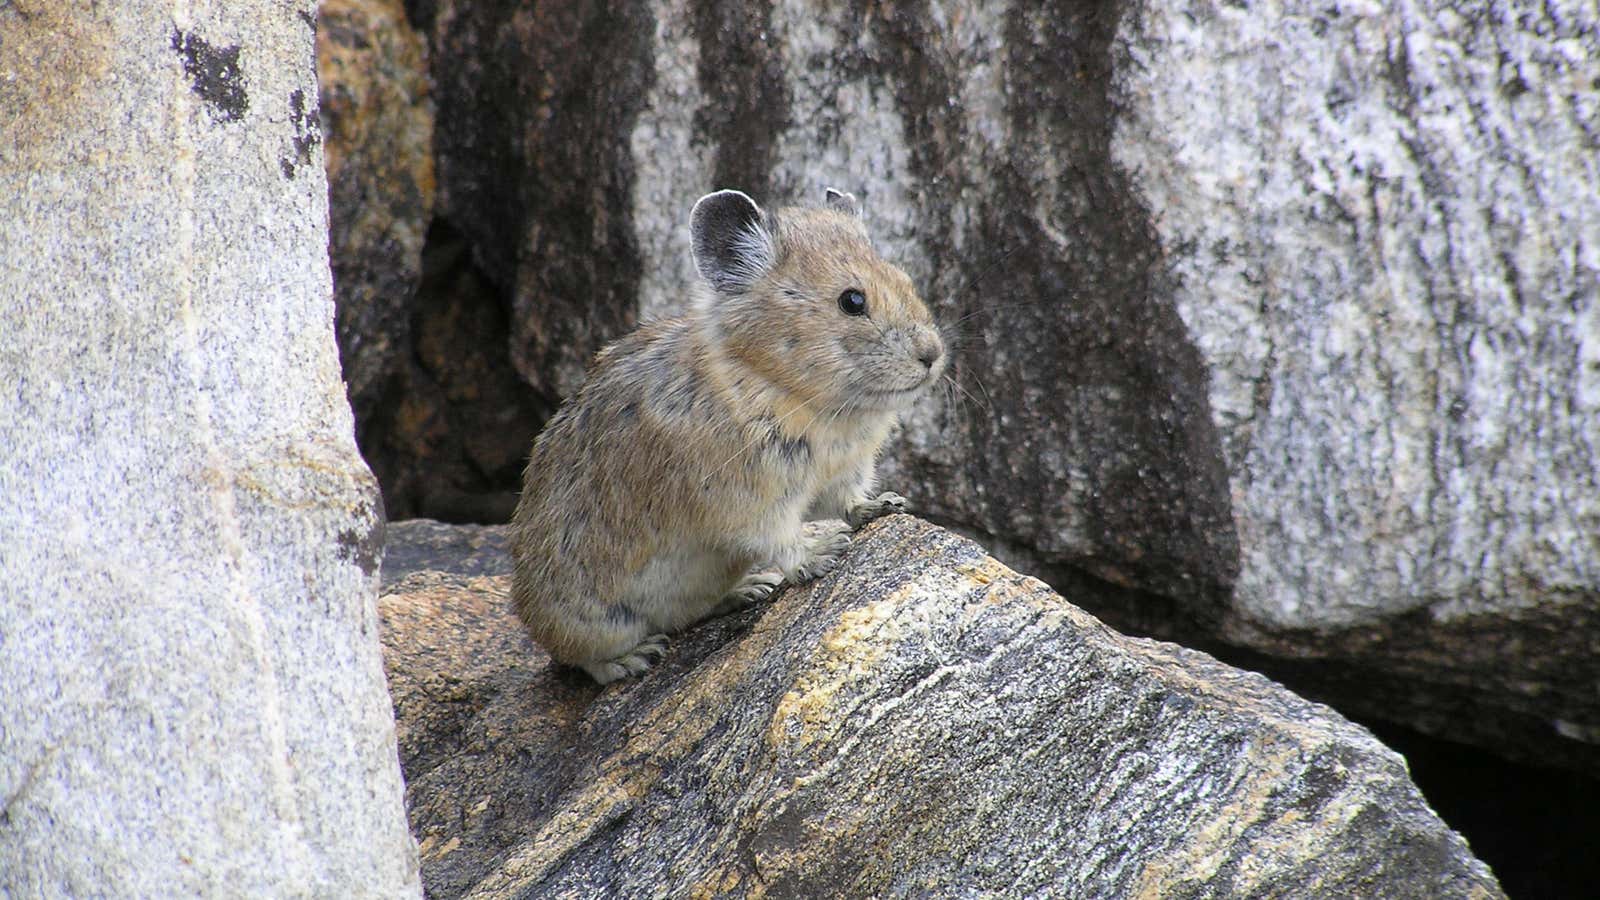 Say goodbye to this cutie, the American pika.